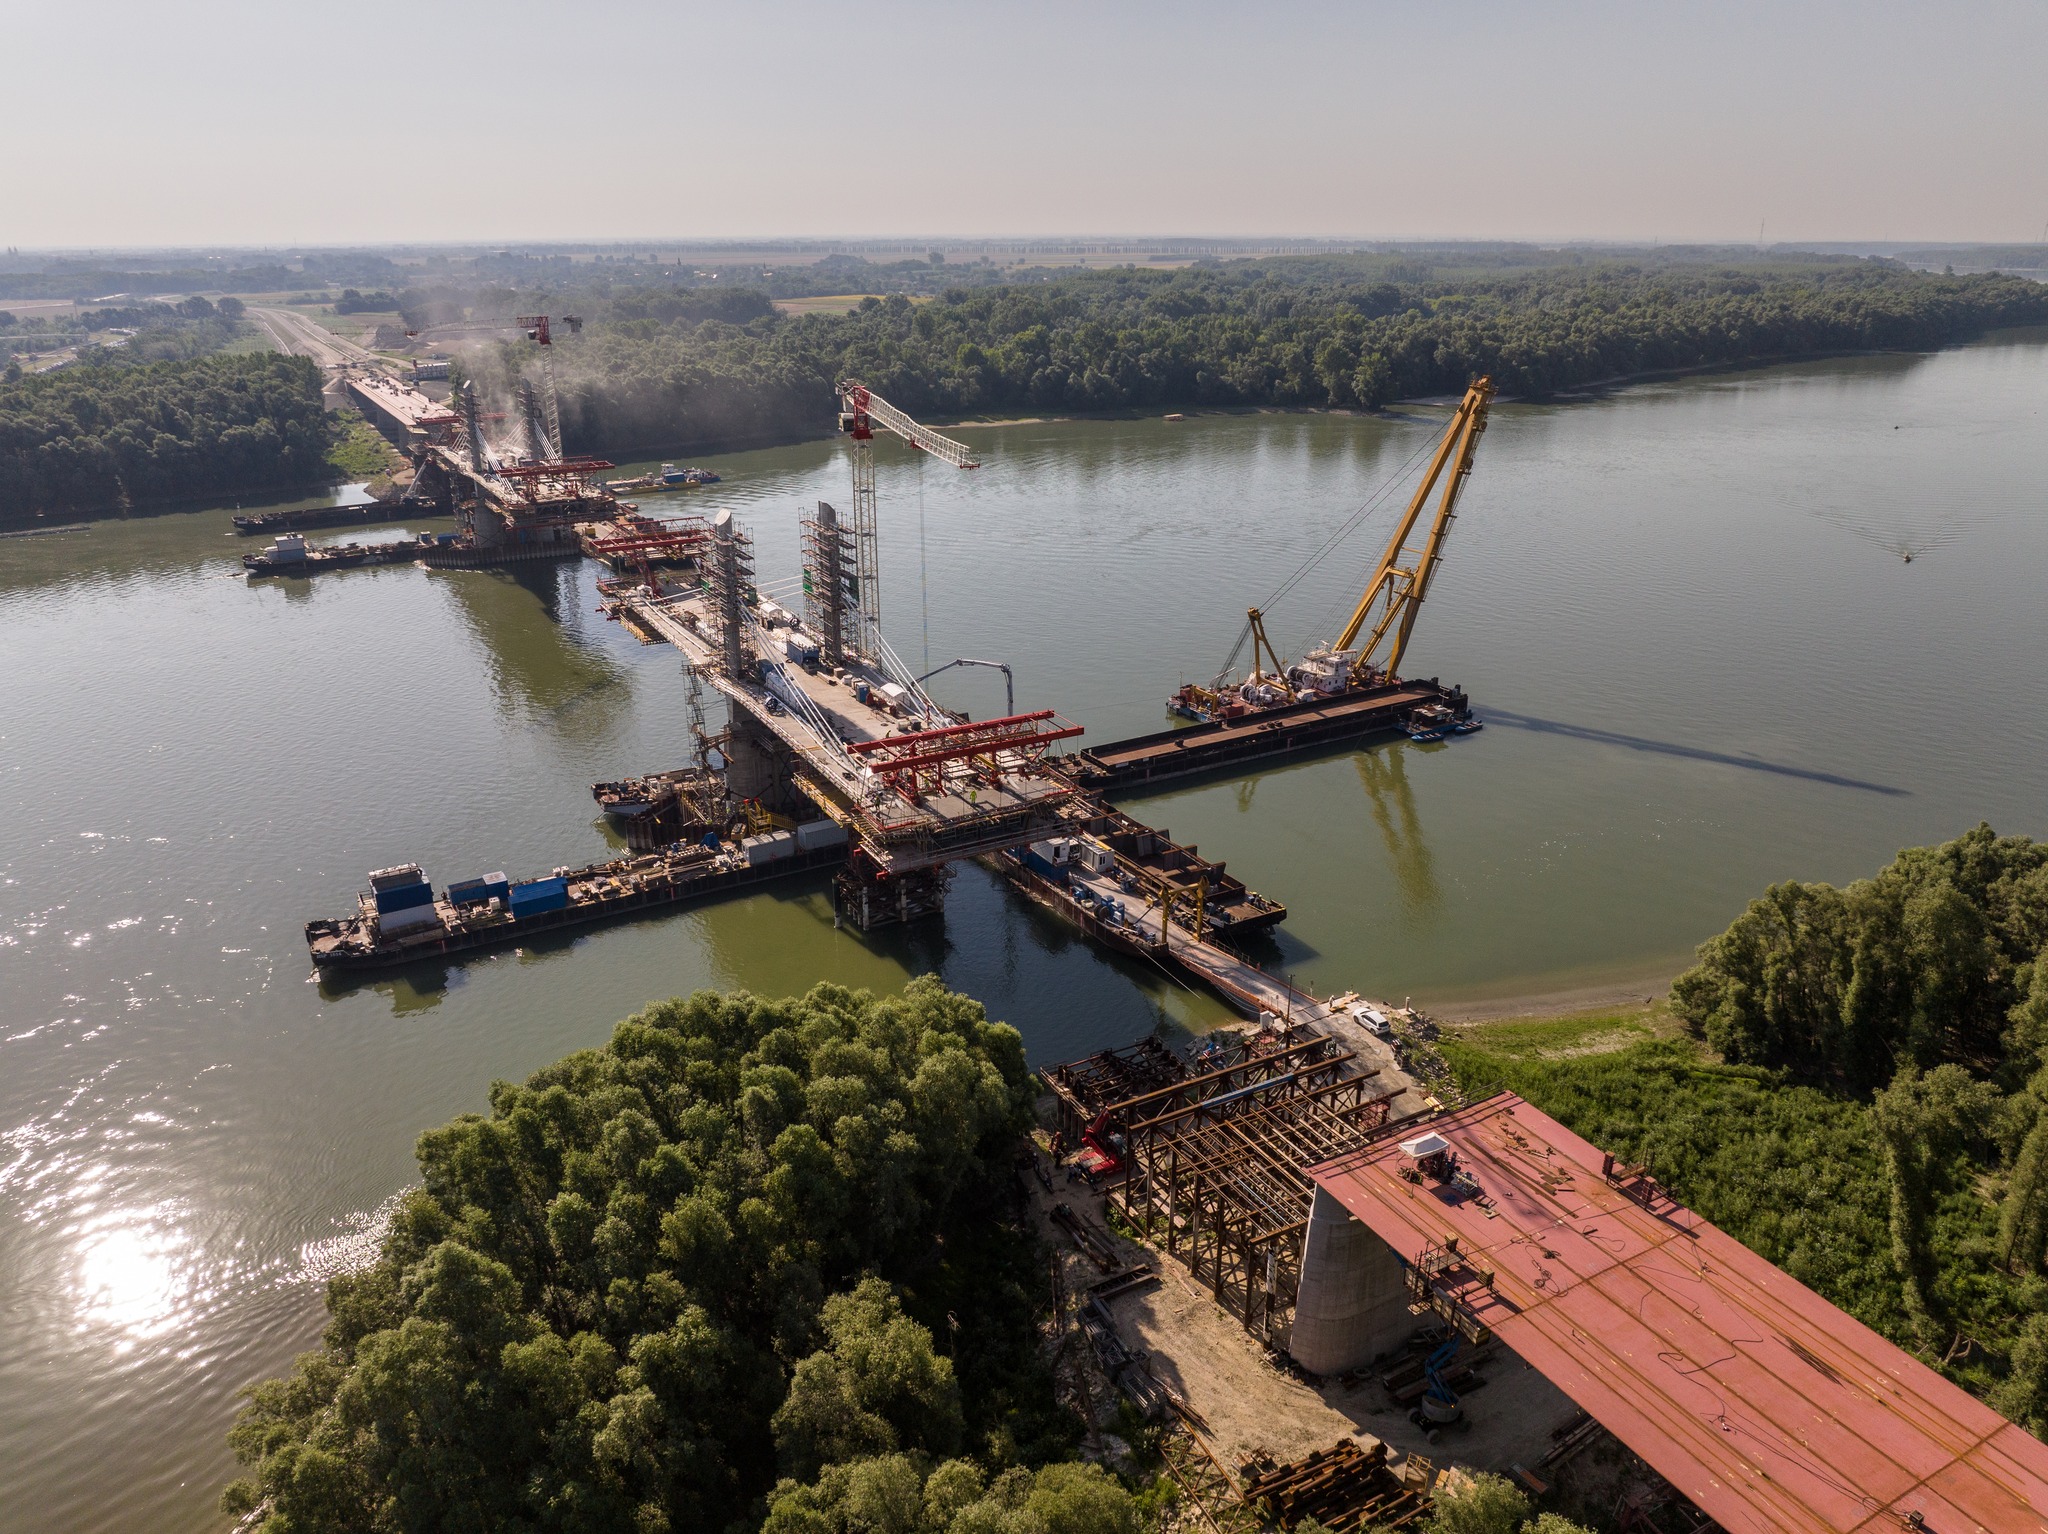 The Newest Danube Bridge Will Be Spectacular